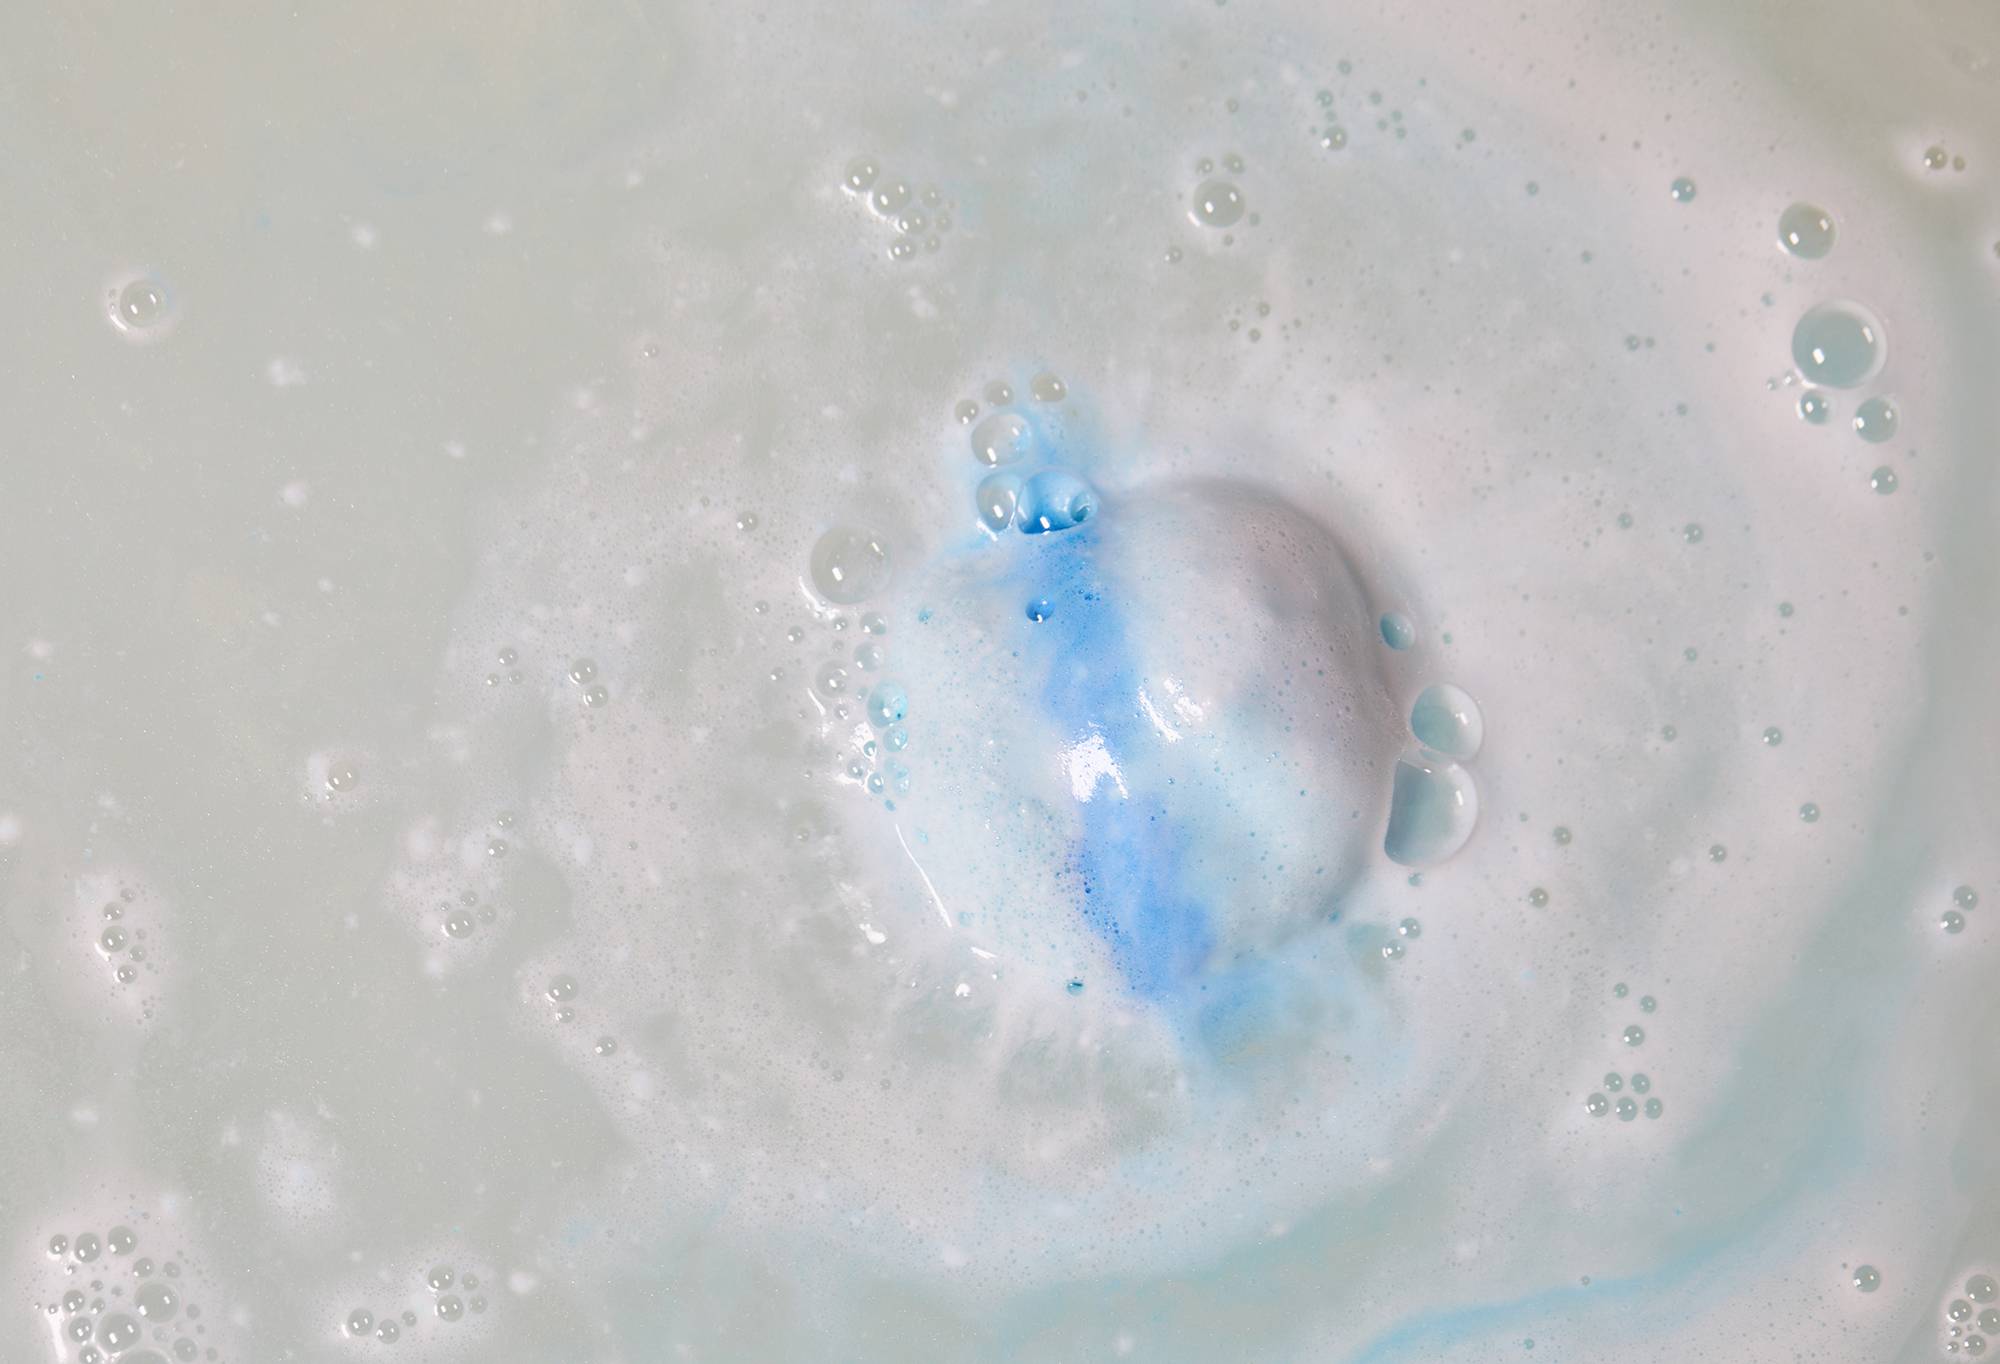 Image shows the Snowdrift bath bomb fizzing away in bathwater creating a delicate blanket of white and blue foam.